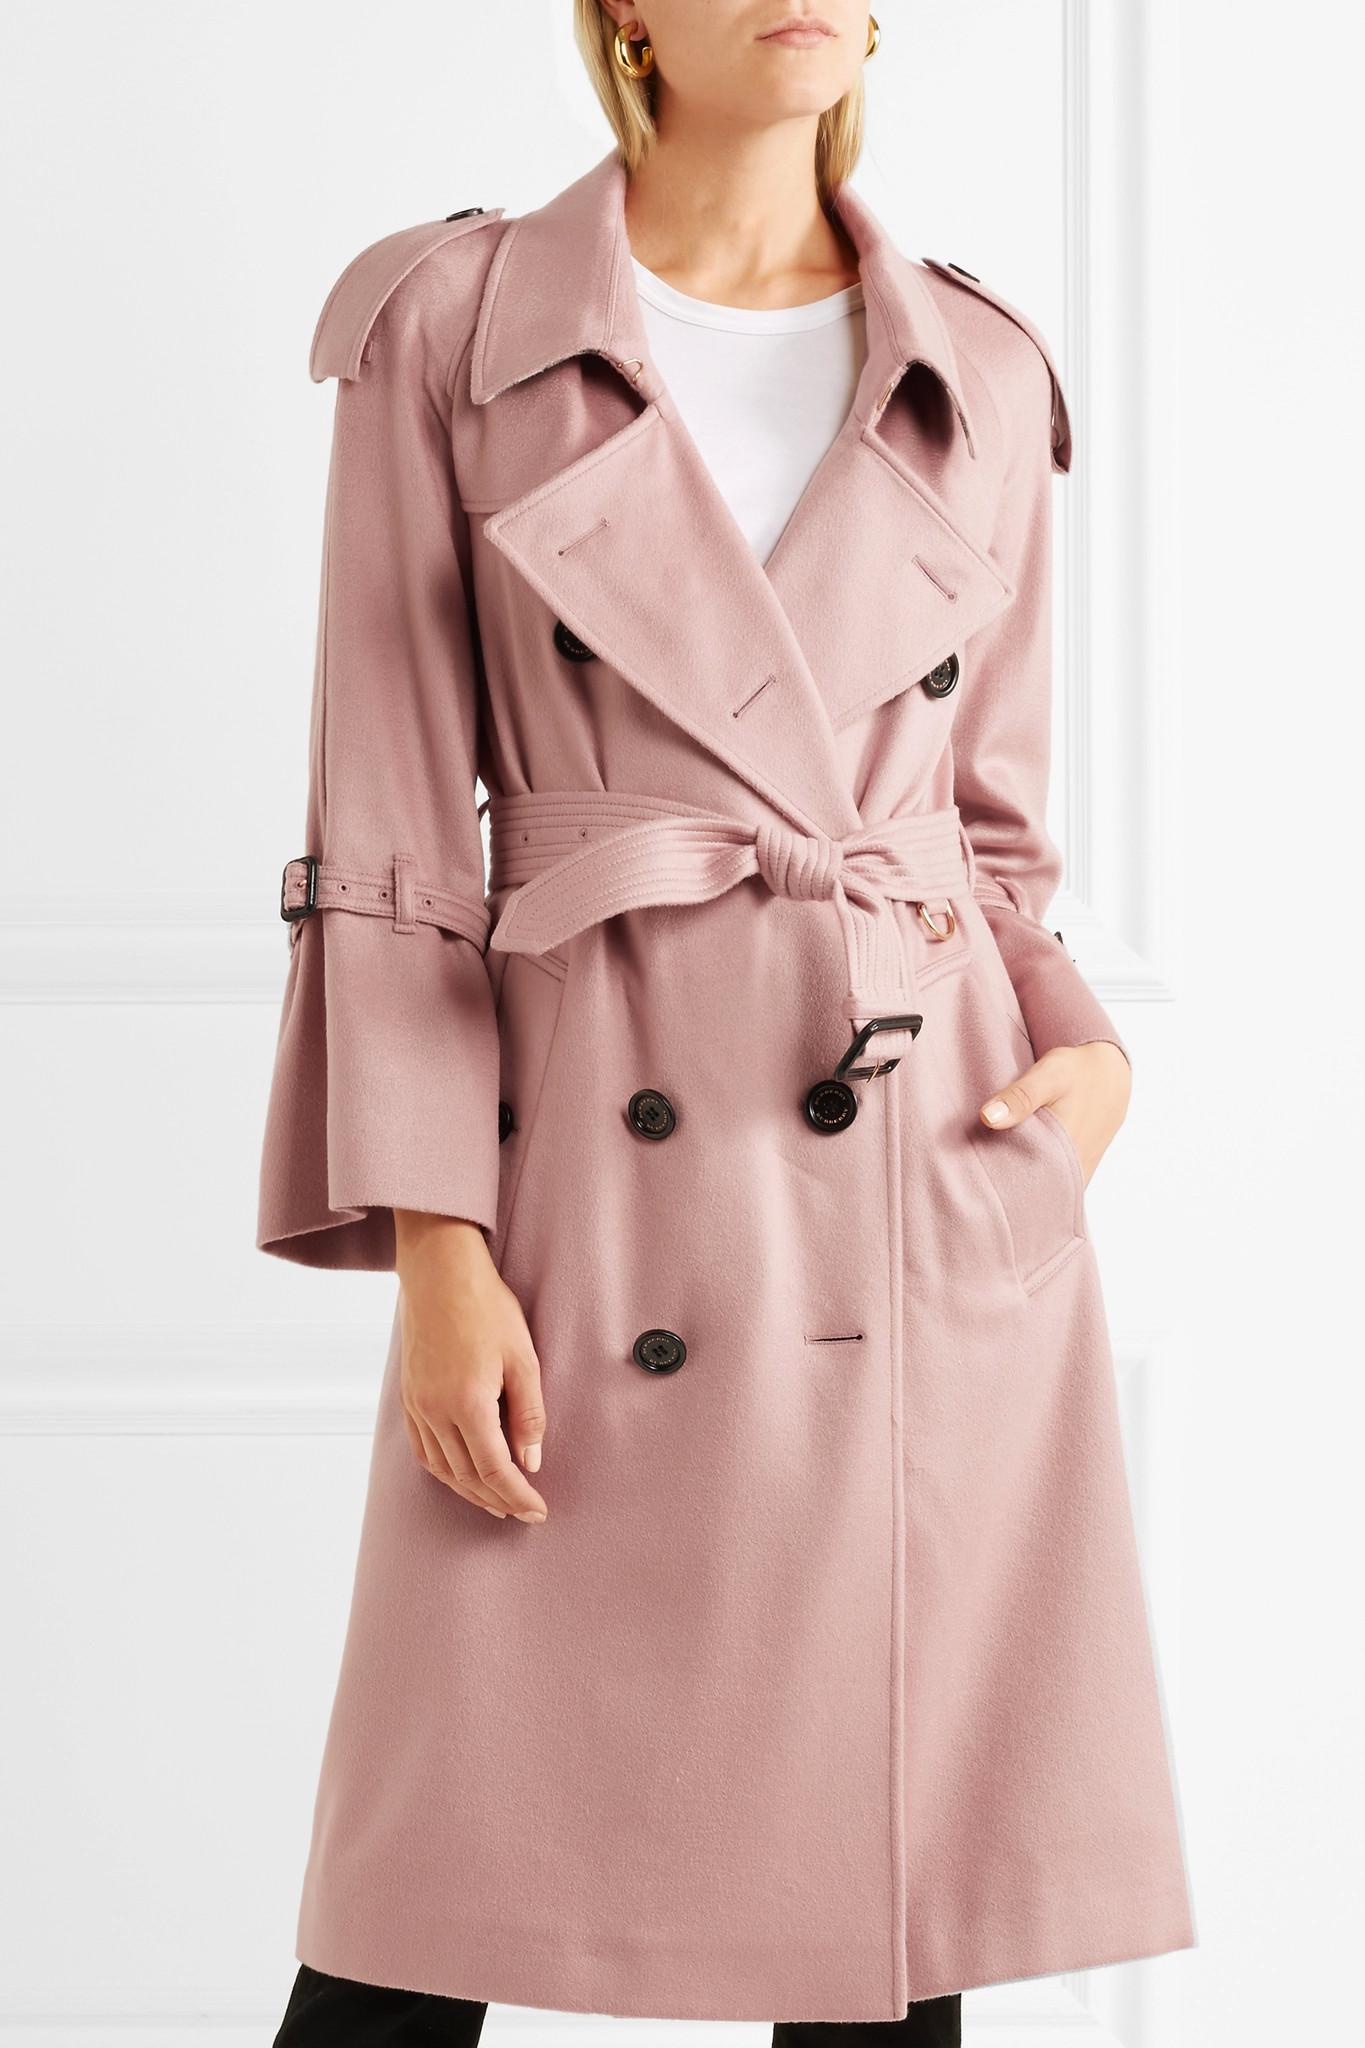 Lyst - Burberry The Lakestone Cashmere Trench Coat in Pink